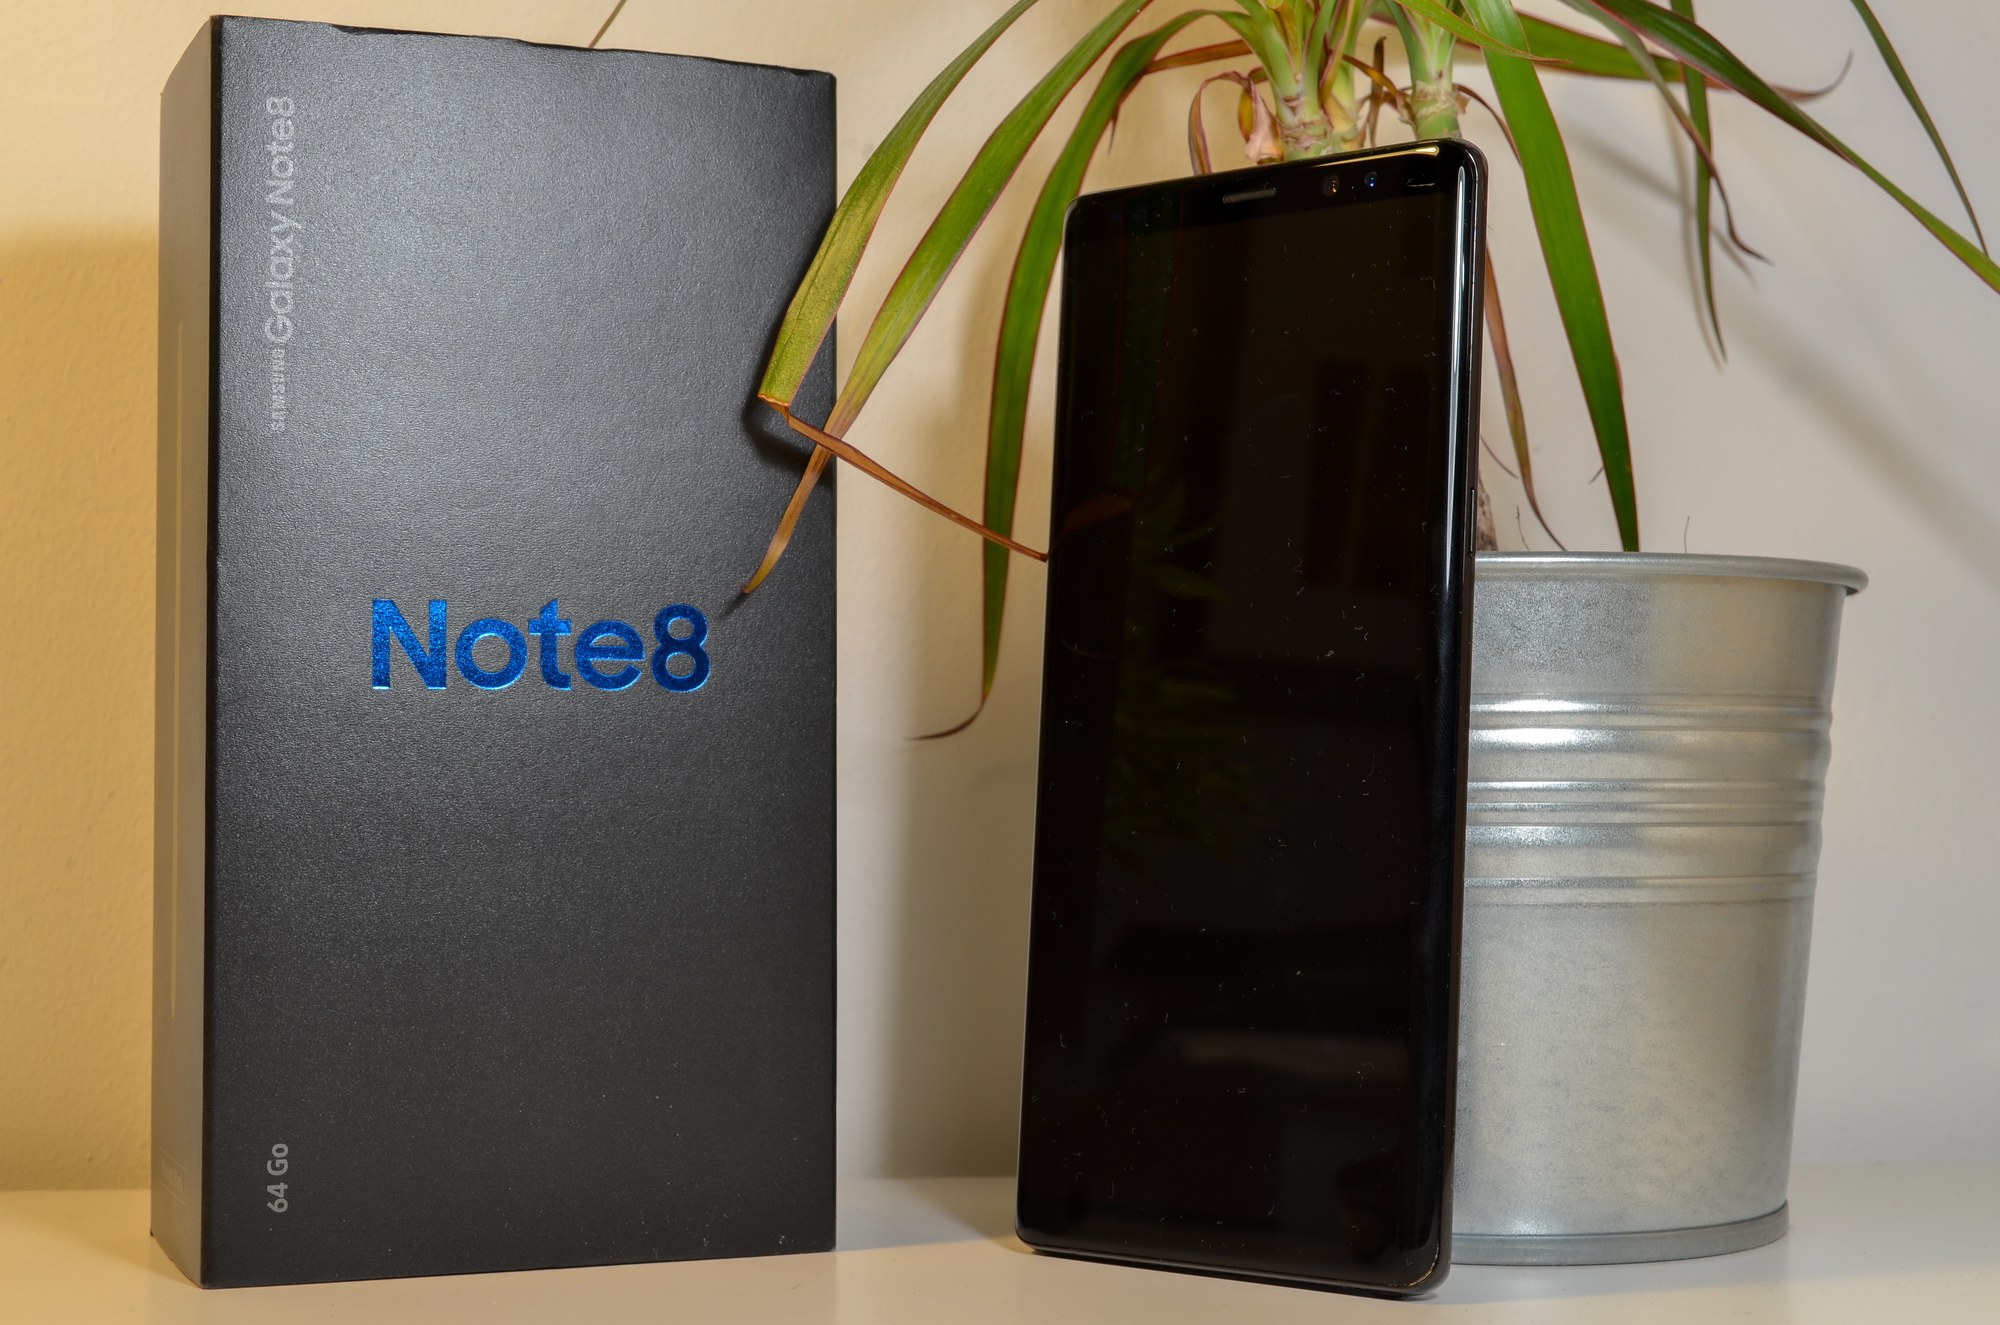 Samsung Note 8 DSC 2206 Test – Samsung Note 8 : L’ultime smartphone qui n’a pas froid aux objectifs Android